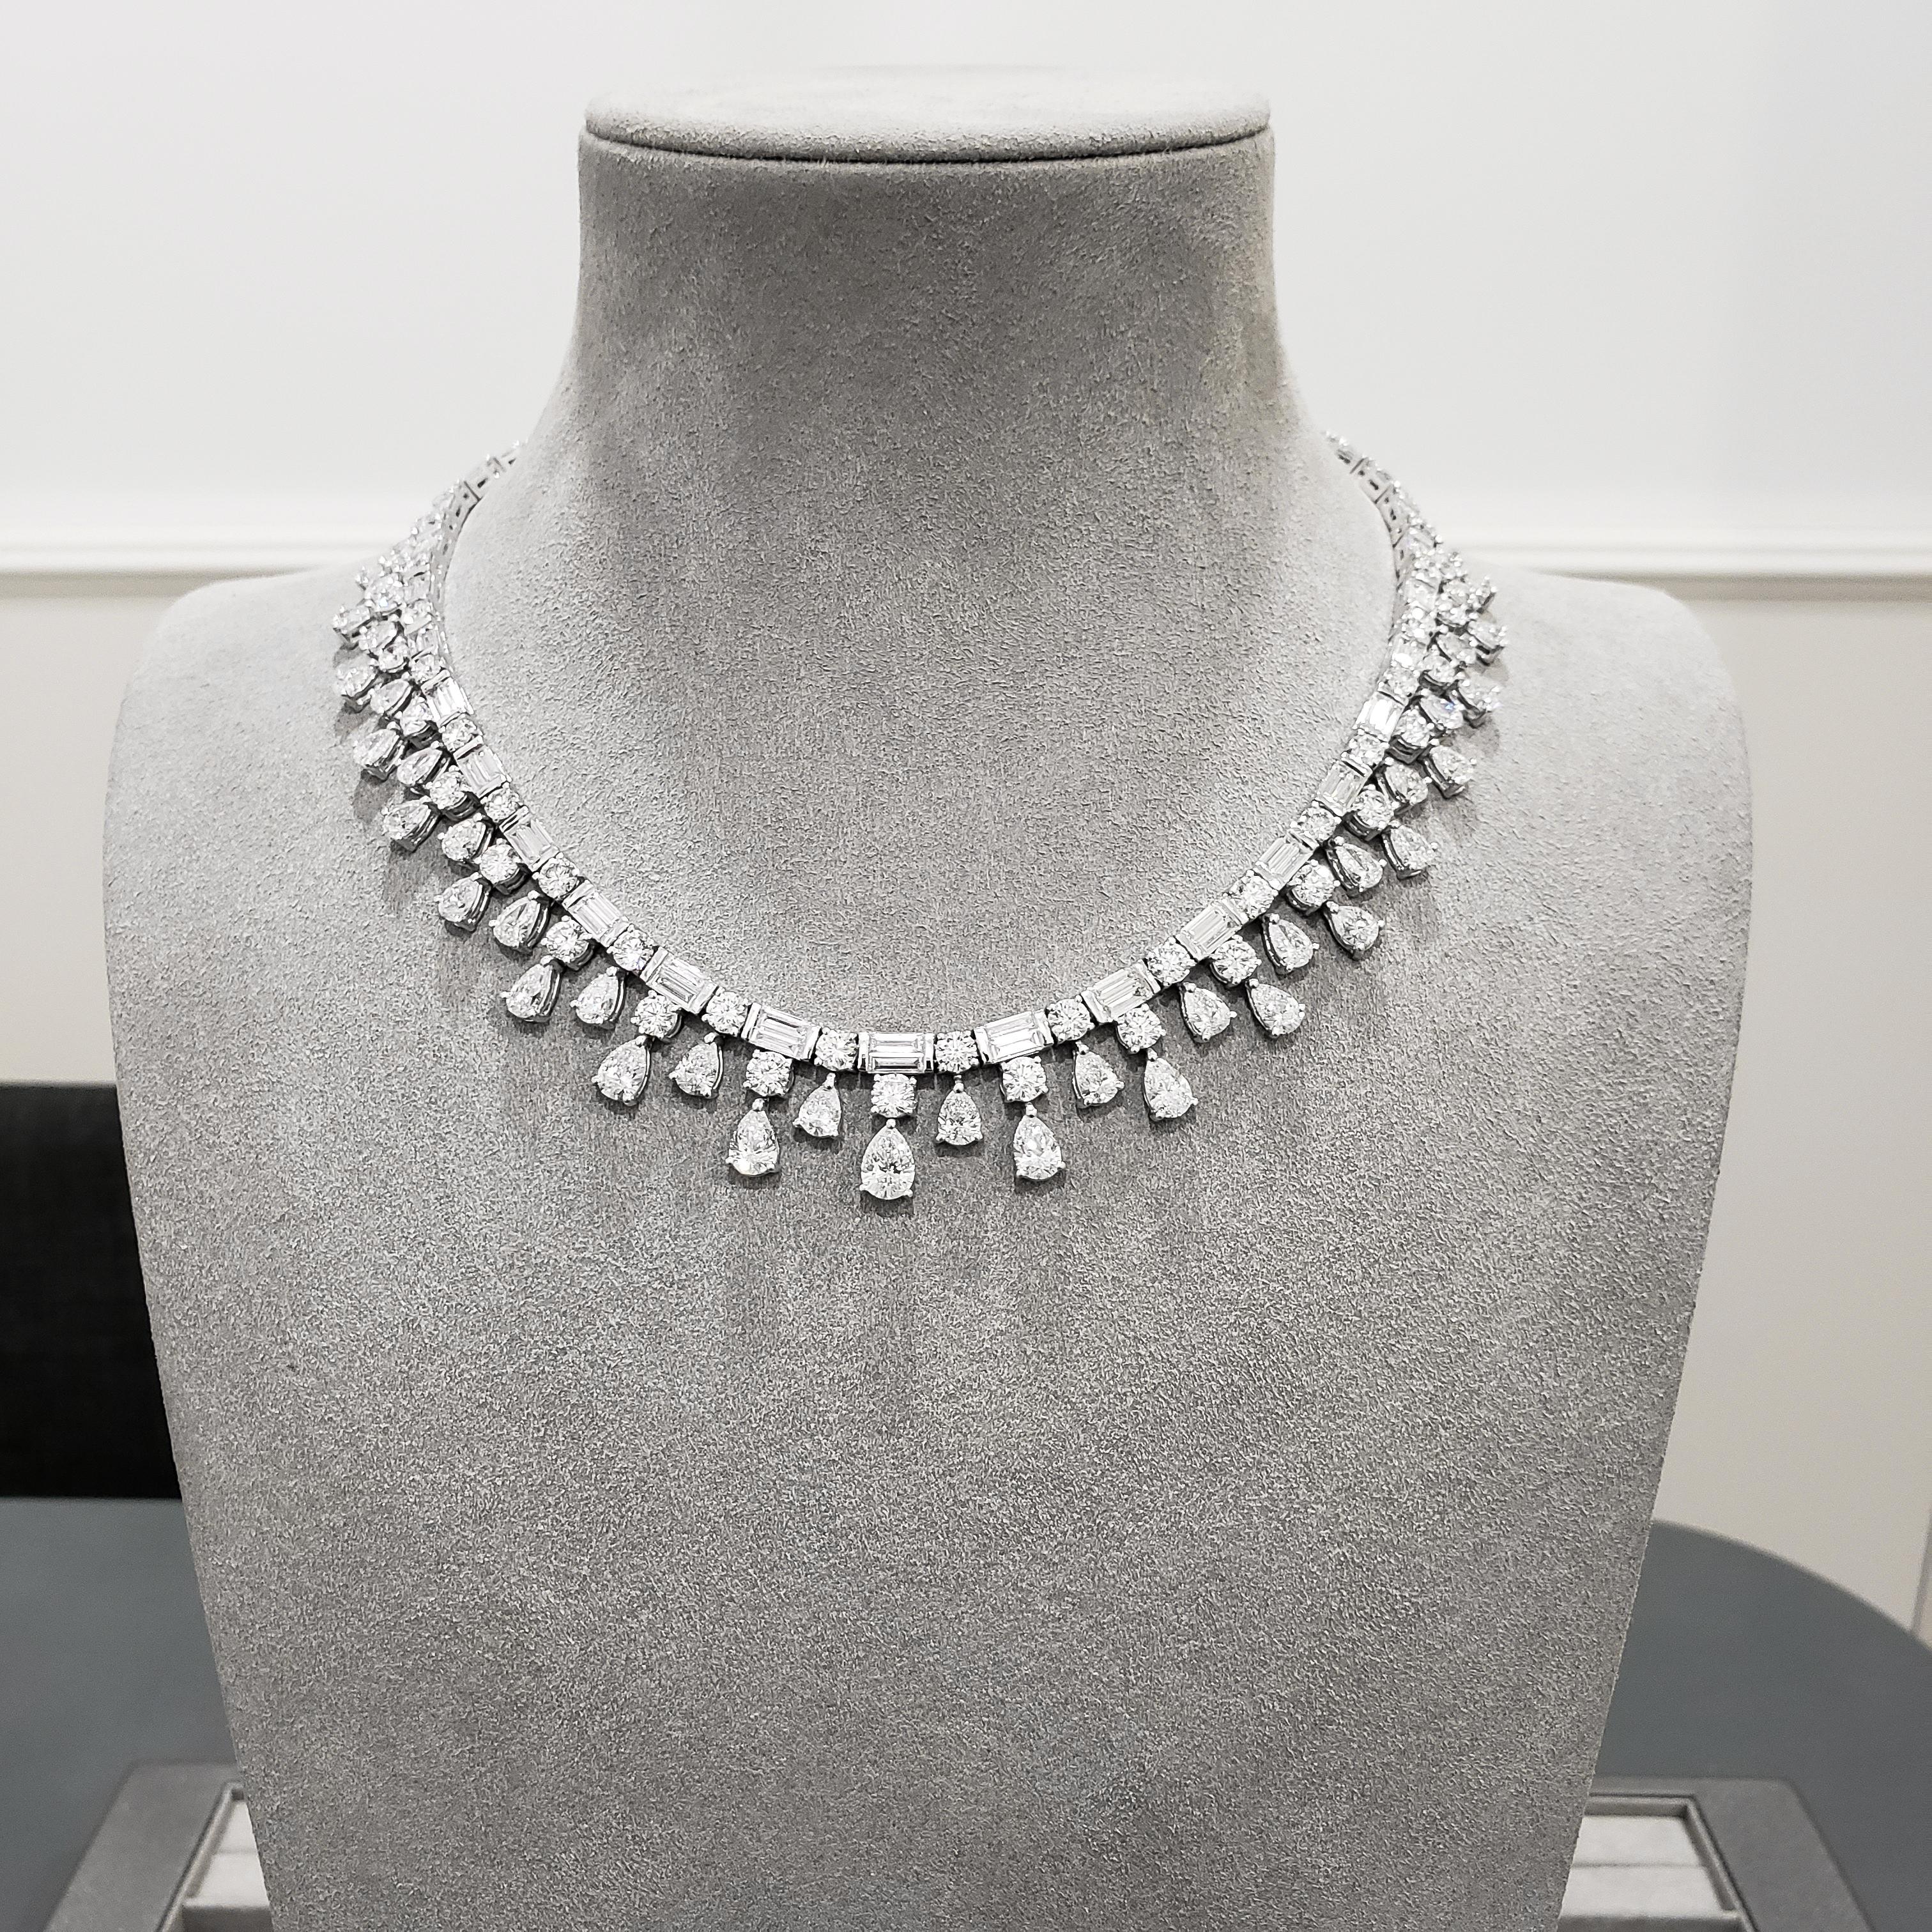 Contemporary Roman Malakov 36.28 Carat Total Mixed Cut Diamond Fringe Necklace in Platinum For Sale